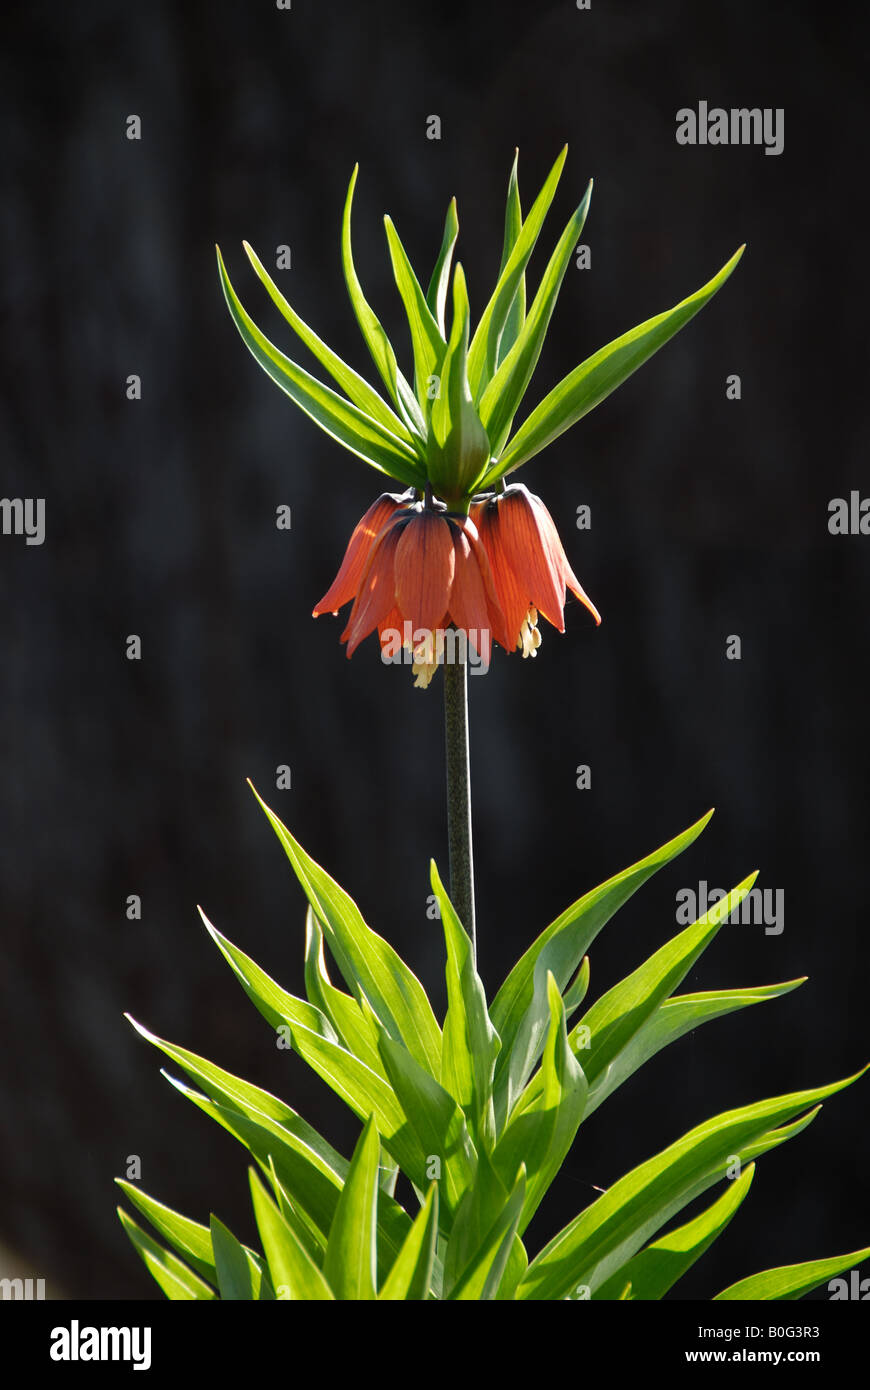 Fritillaria imperialis. This spring blooming perennial has a pungent skunk like odor. Also know as crown imperialis. Stock Photo